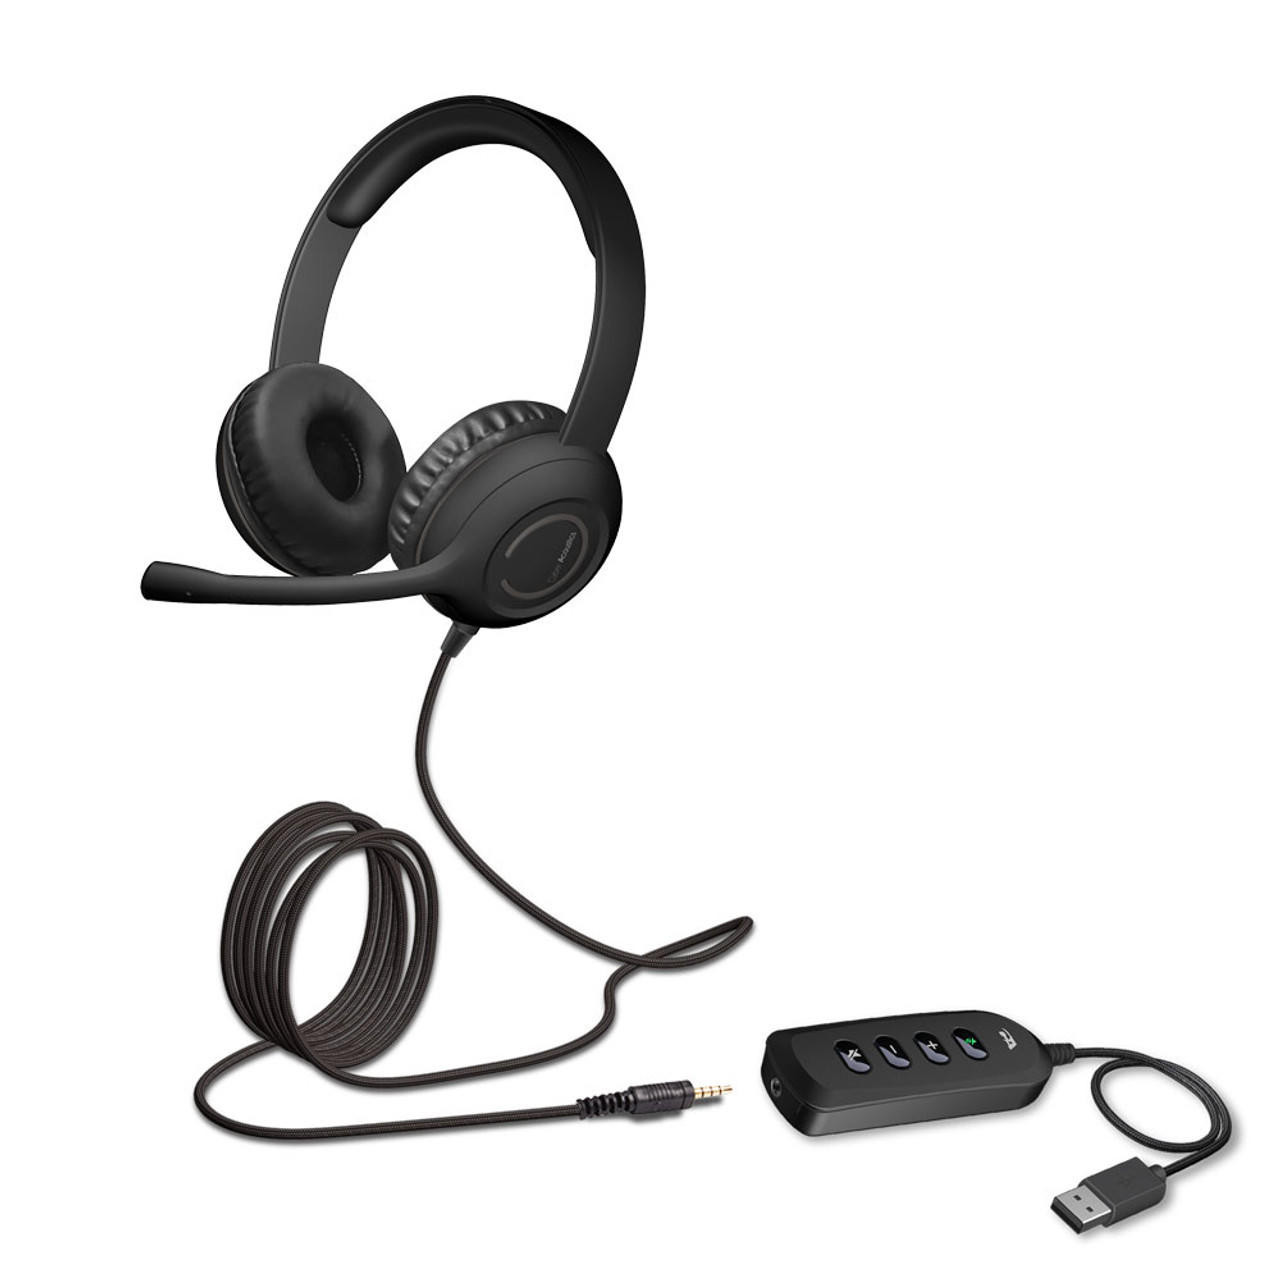 Cyber Acoustics AC-5812 USB or 3.5mm Stereo Headset with Noise